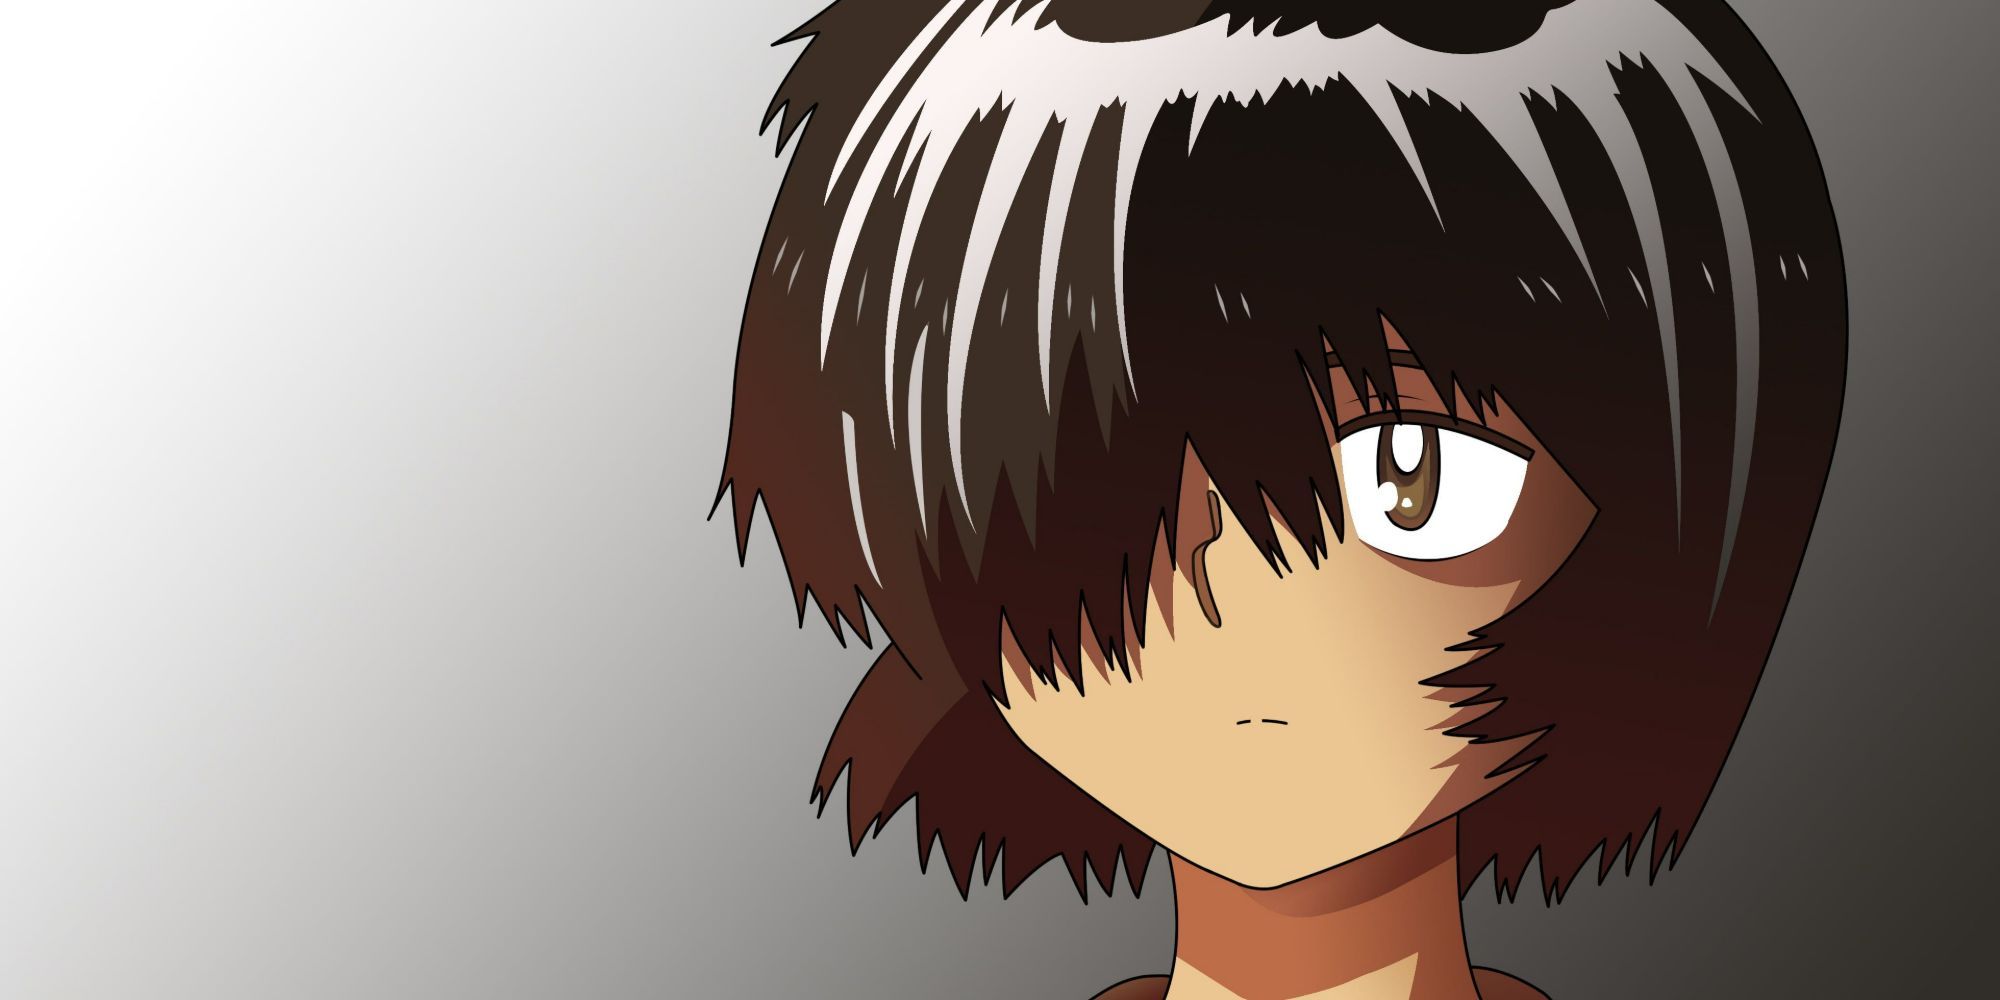 The main character from Mysterious Girlfriend X